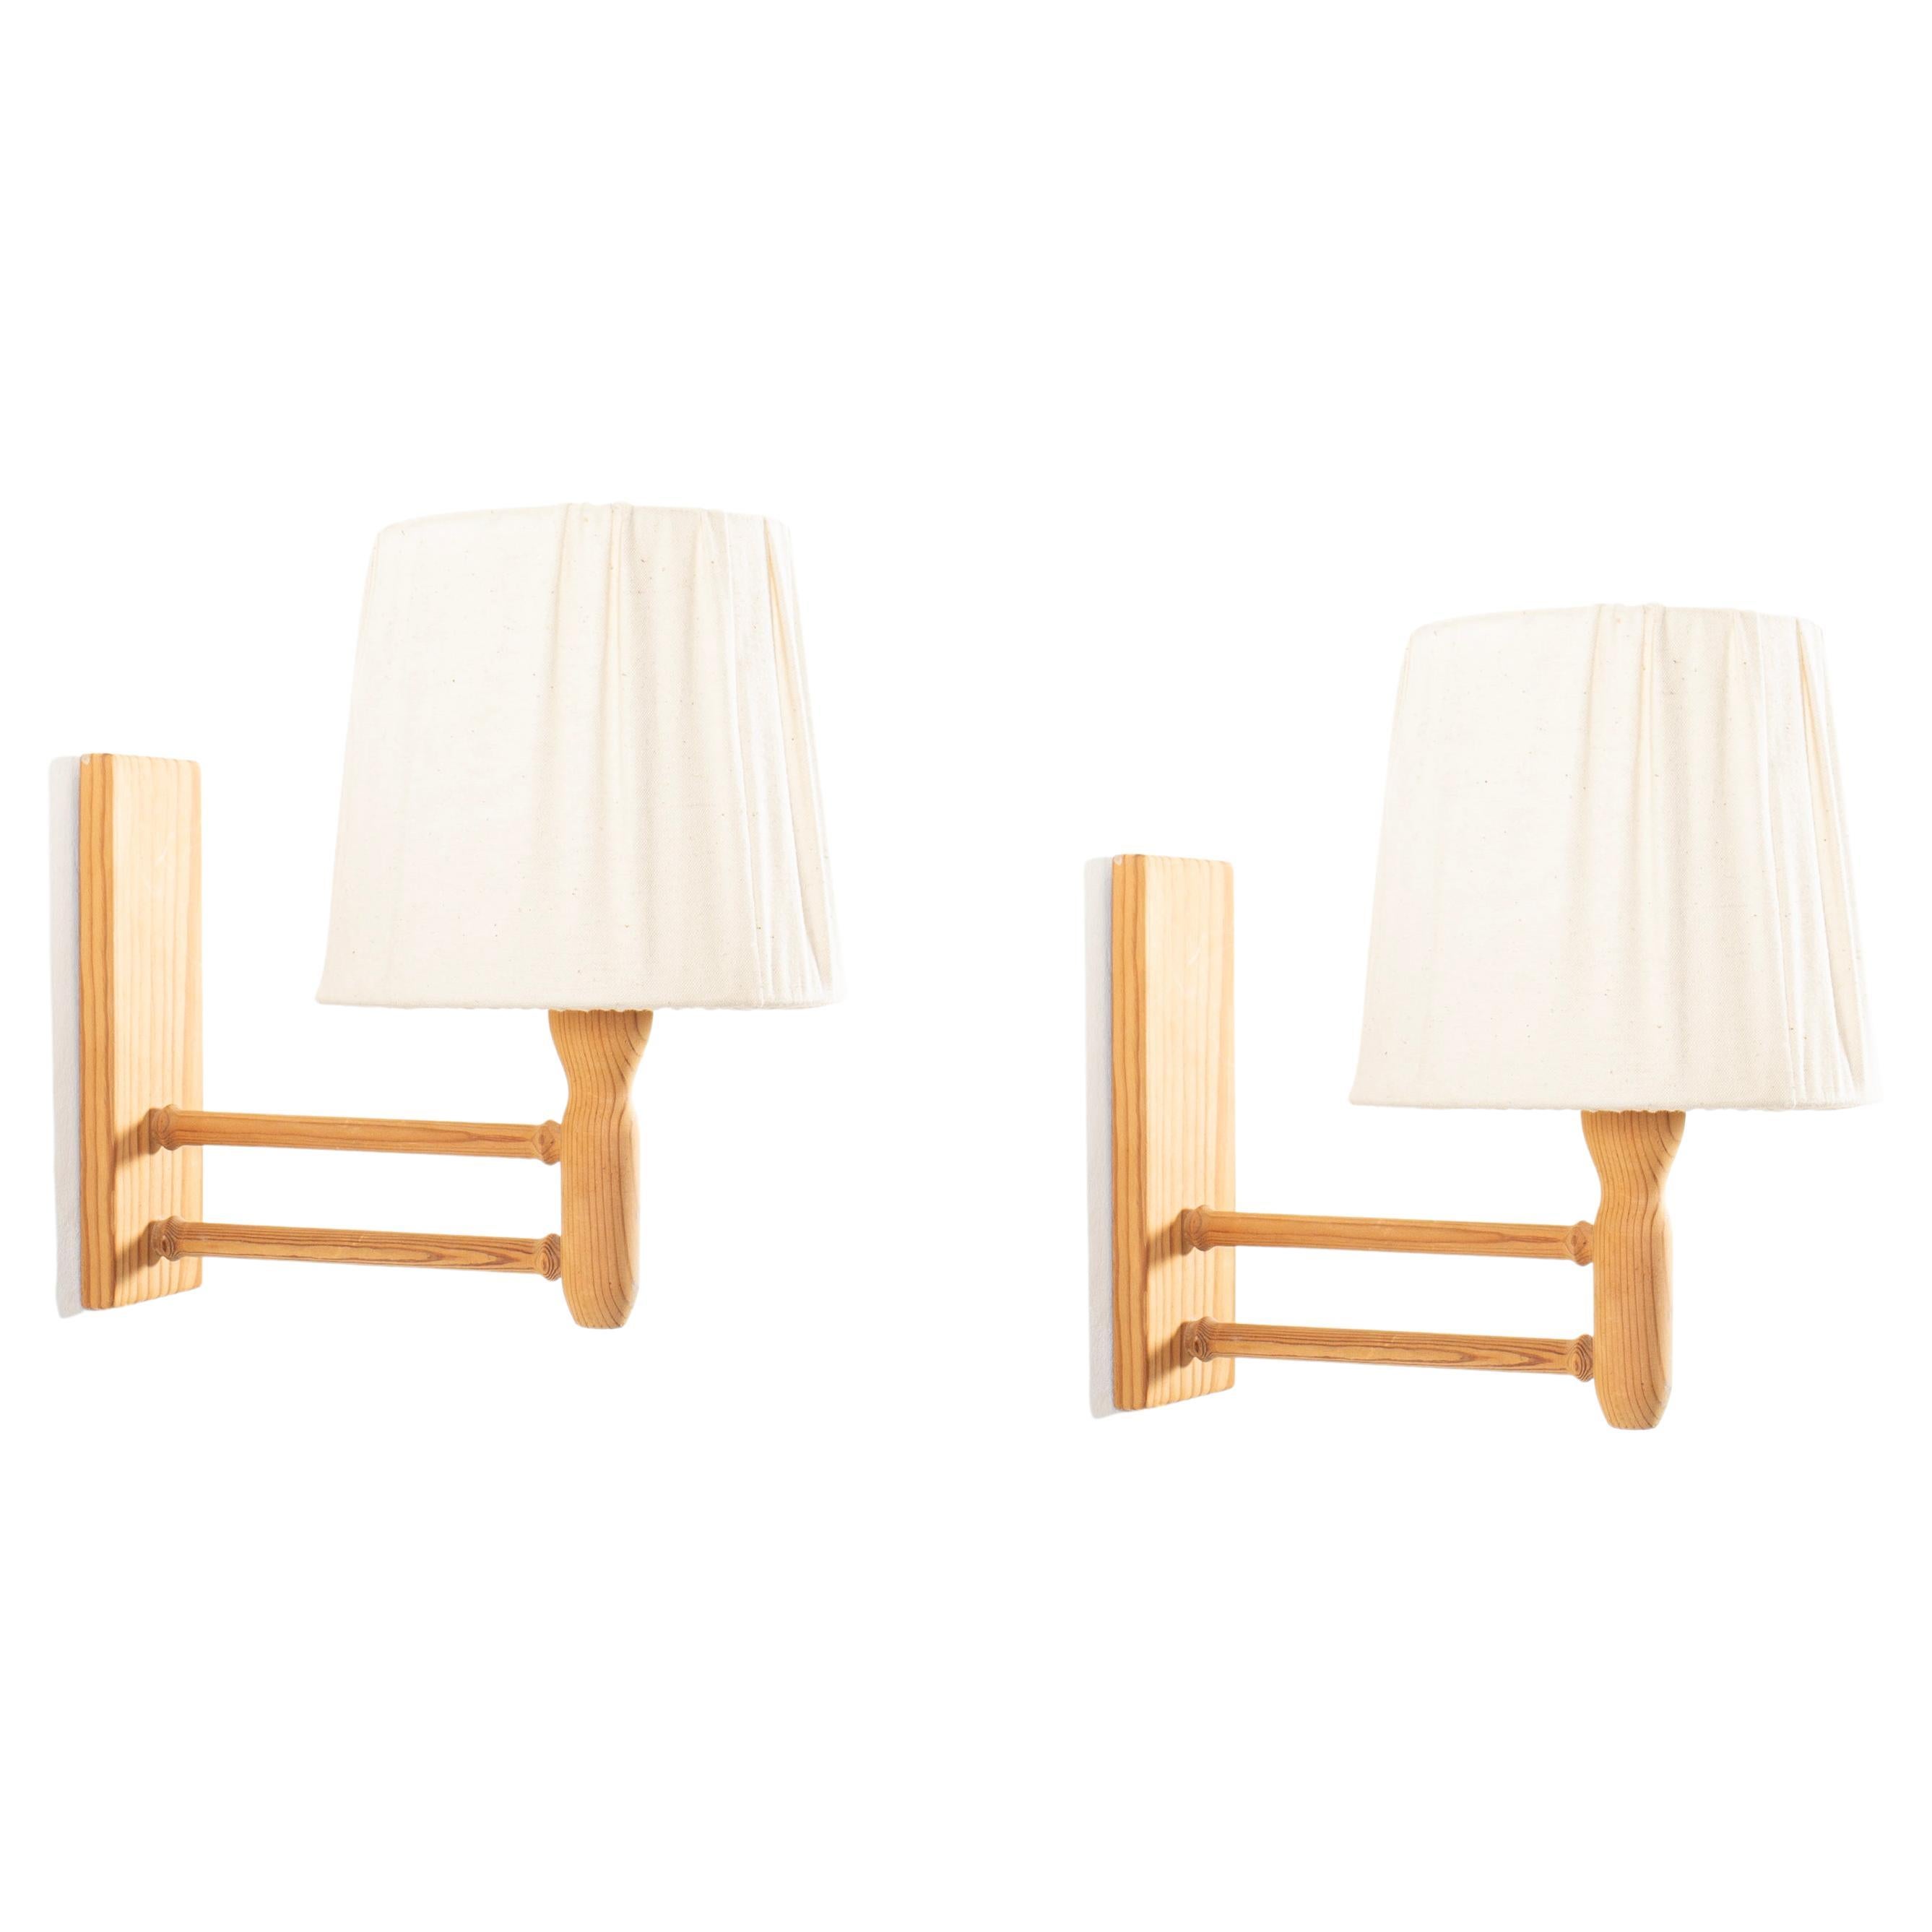 Pair of Wall Lights in Pine, Norway, 1960s For Sale